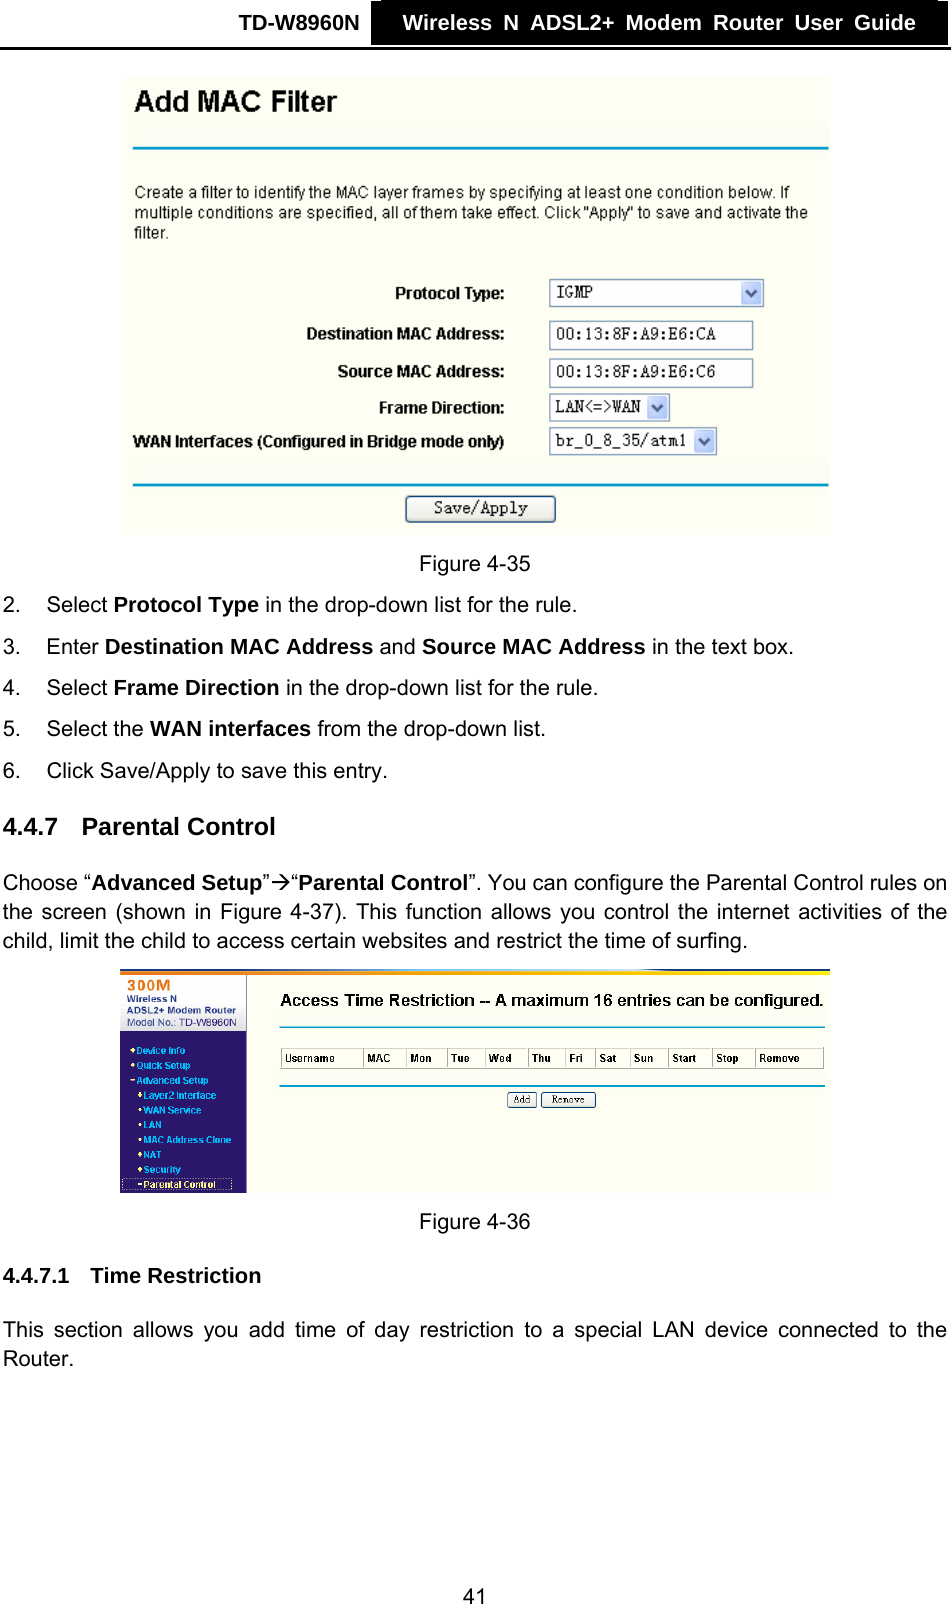 TD-W8960N    Wireless N ADSL2+ Modem Router User Guide     Figure 4-35 2. Select Protocol Type in the drop-down list for the rule. 3. Enter Destination MAC Address and Source MAC Address in the text box. 4. Select Frame Direction in the drop-down list for the rule. 5. Select the WAN interfaces from the drop-down list. 6.  Click Save/Apply to save this entry. 4.4.7  Parental Control Choose “Advanced Setup”Æ“Parental Control”. You can configure the Parental Control rules on the screen (shown in Figure 4-37). This function allows you control the internet activities of the child, limit the child to access certain websites and restrict the time of surfing.   Figure 4-36 4.4.7.1  Time Restriction This section allows you add time of day restriction to a special LAN device connected to the Router. 41 